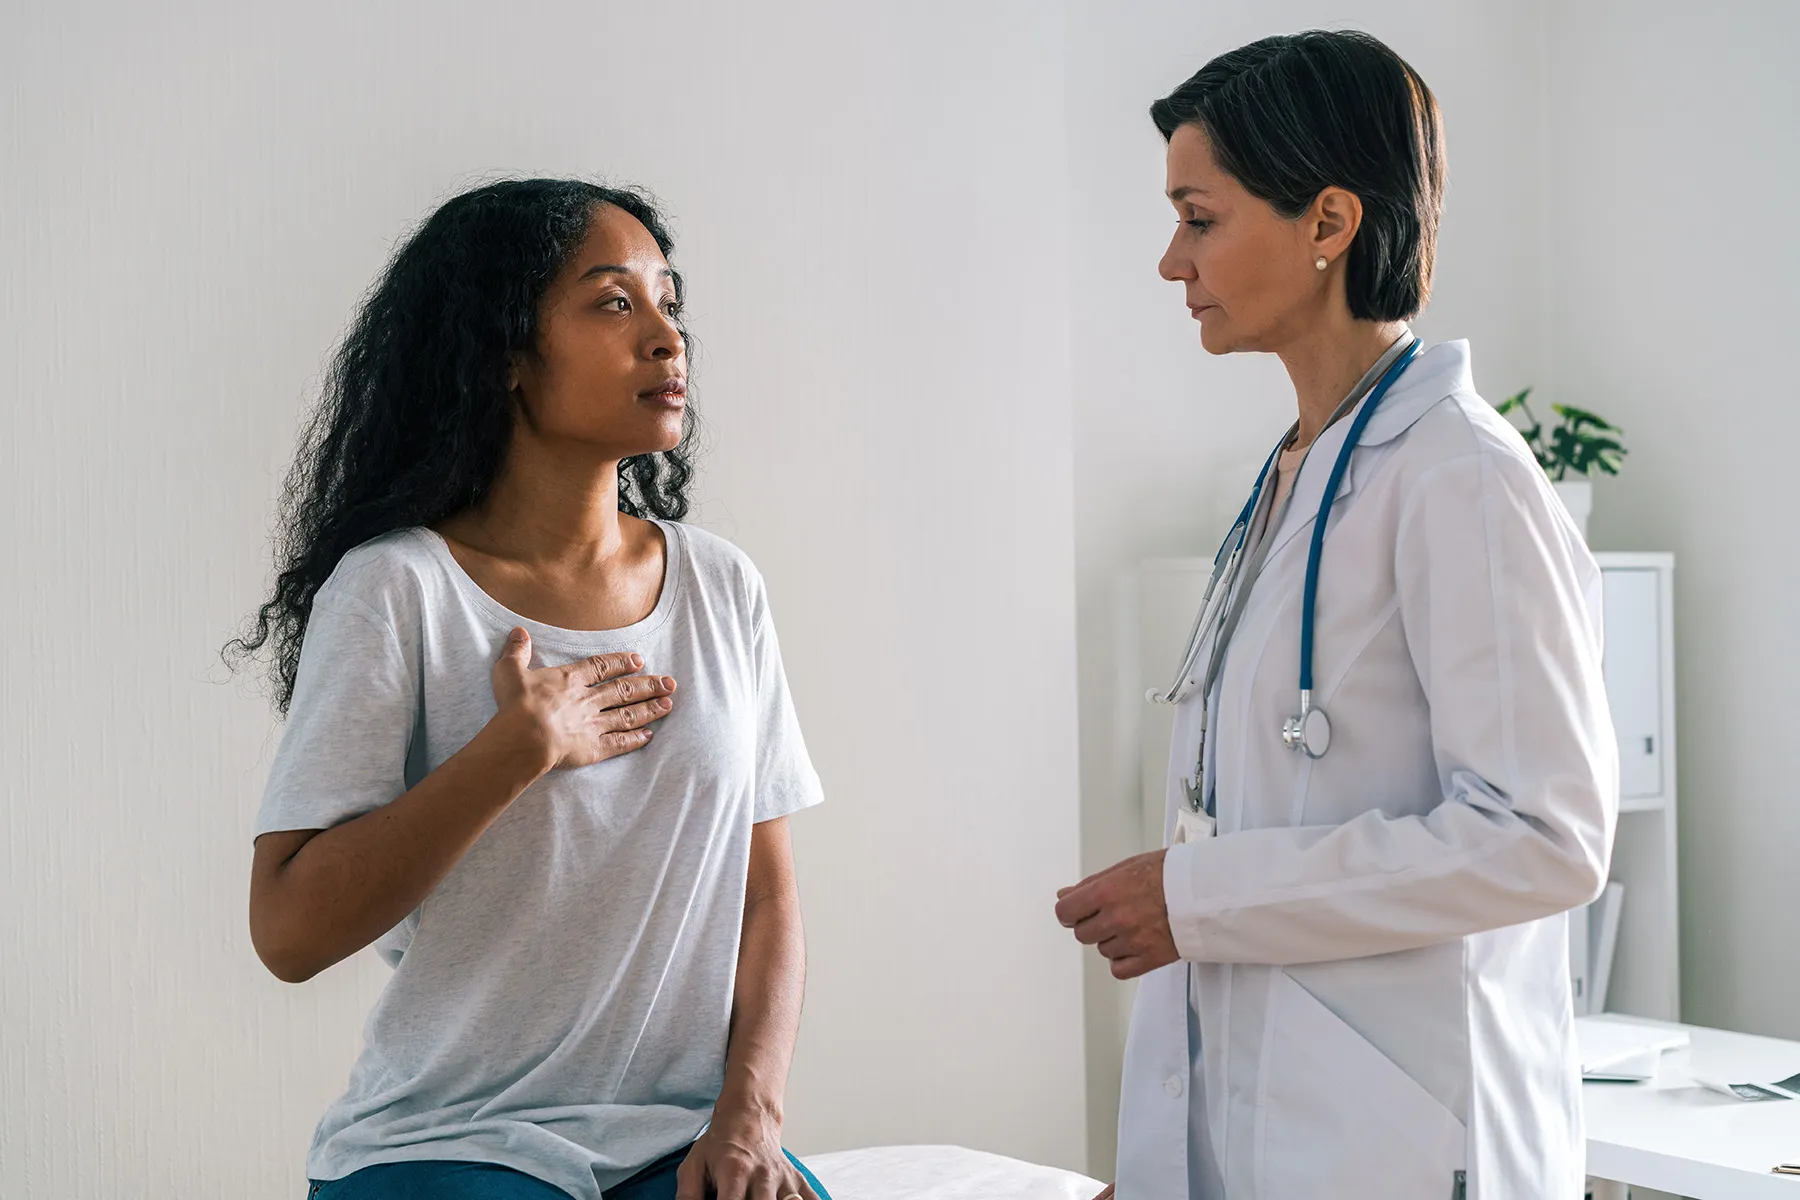 This Heart Attack Hits Young Women, But Doctors Often Unaware